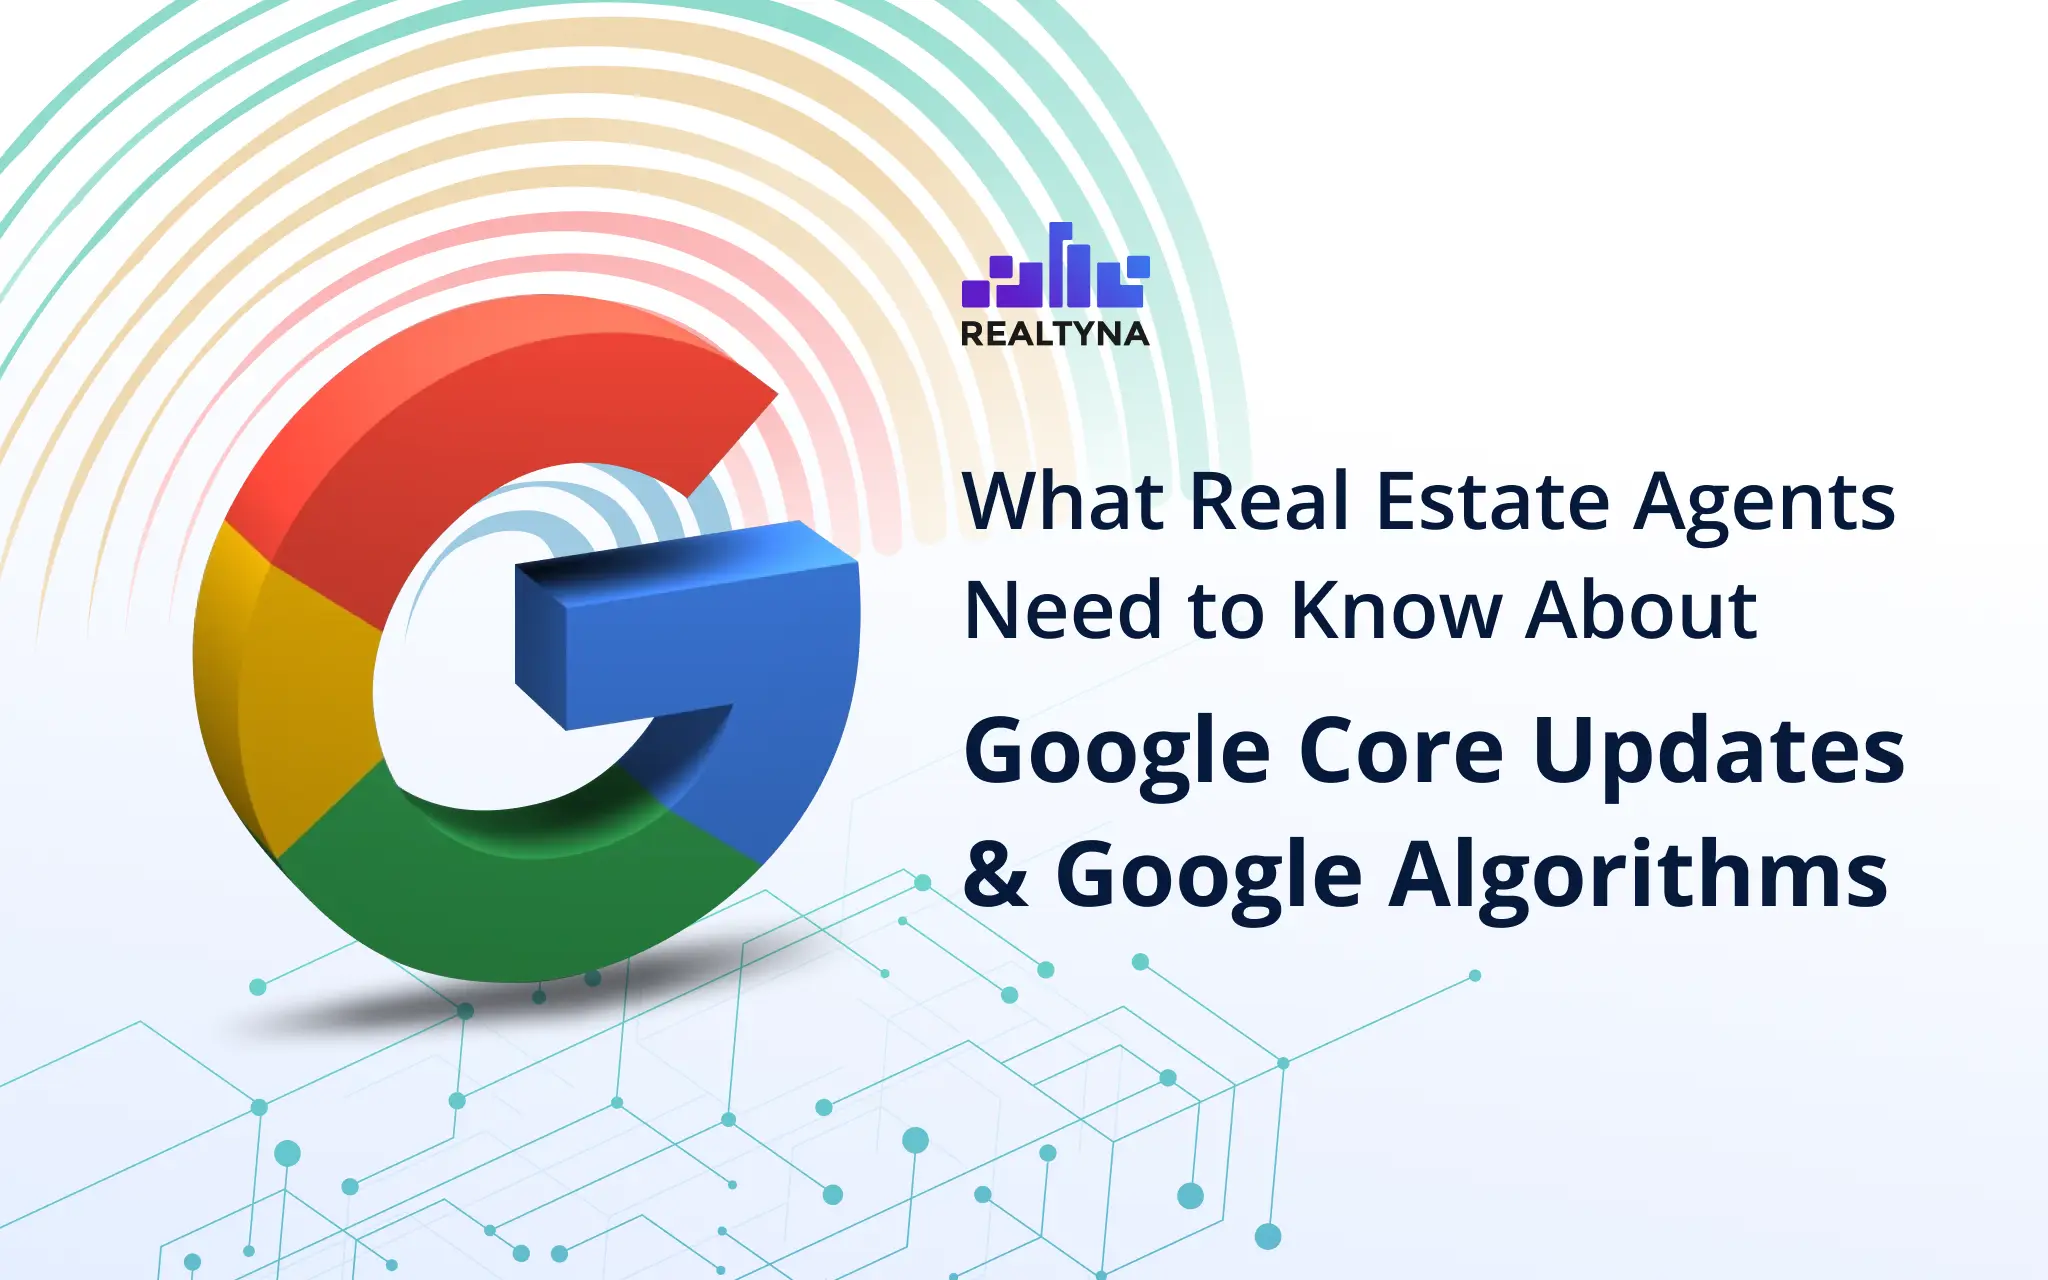 What Real Estate Agents Need to Know About Google Core Updates & Google Algorithms